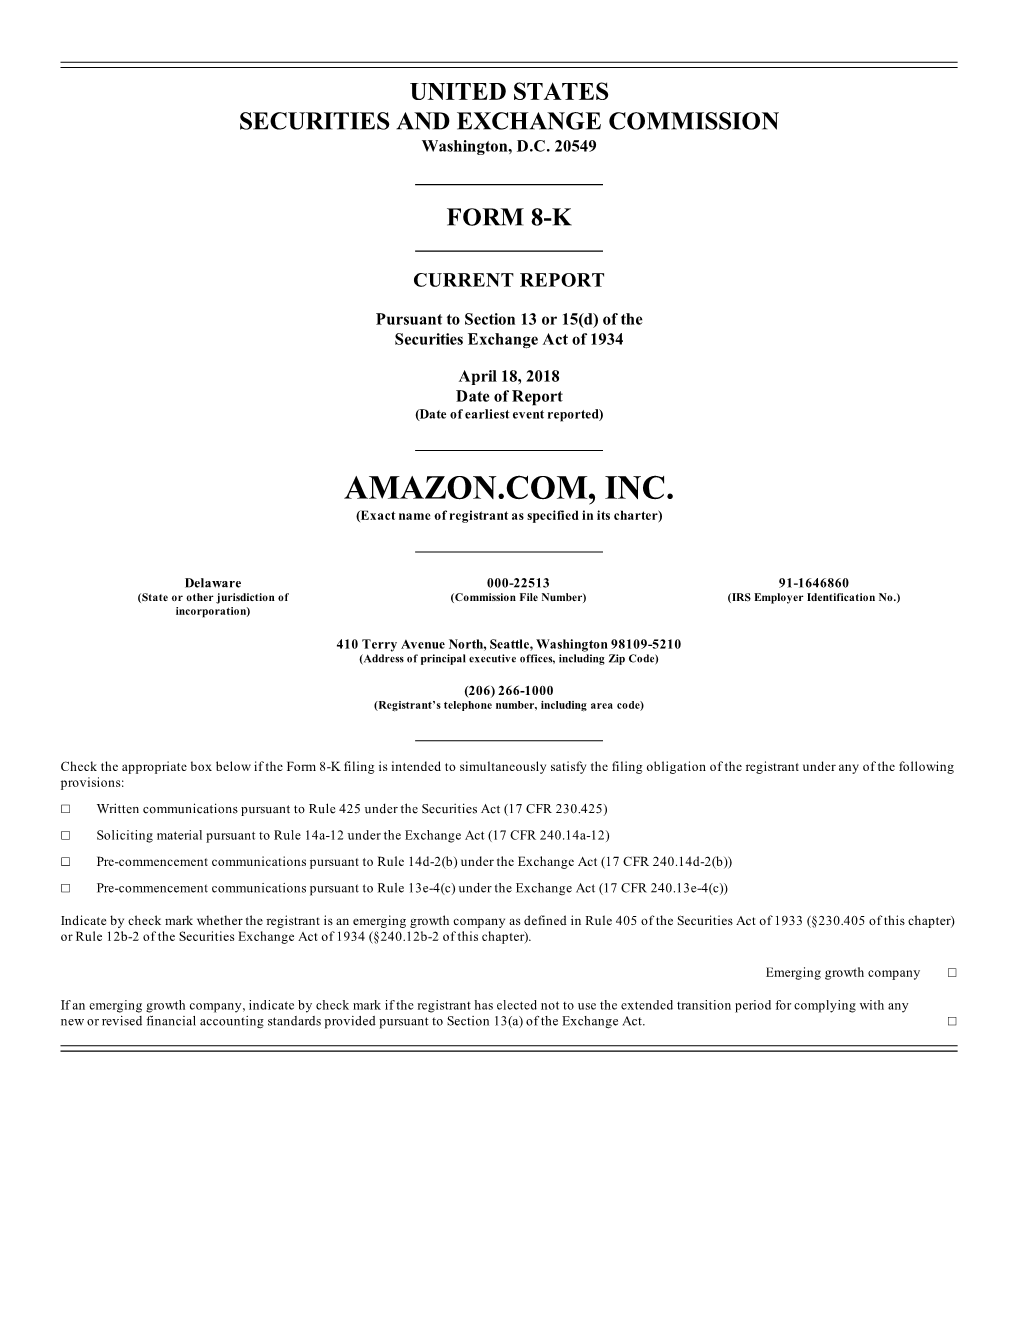 AMAZON.COM, INC. (Exact Name of Registrant As Specified in Its Charter)